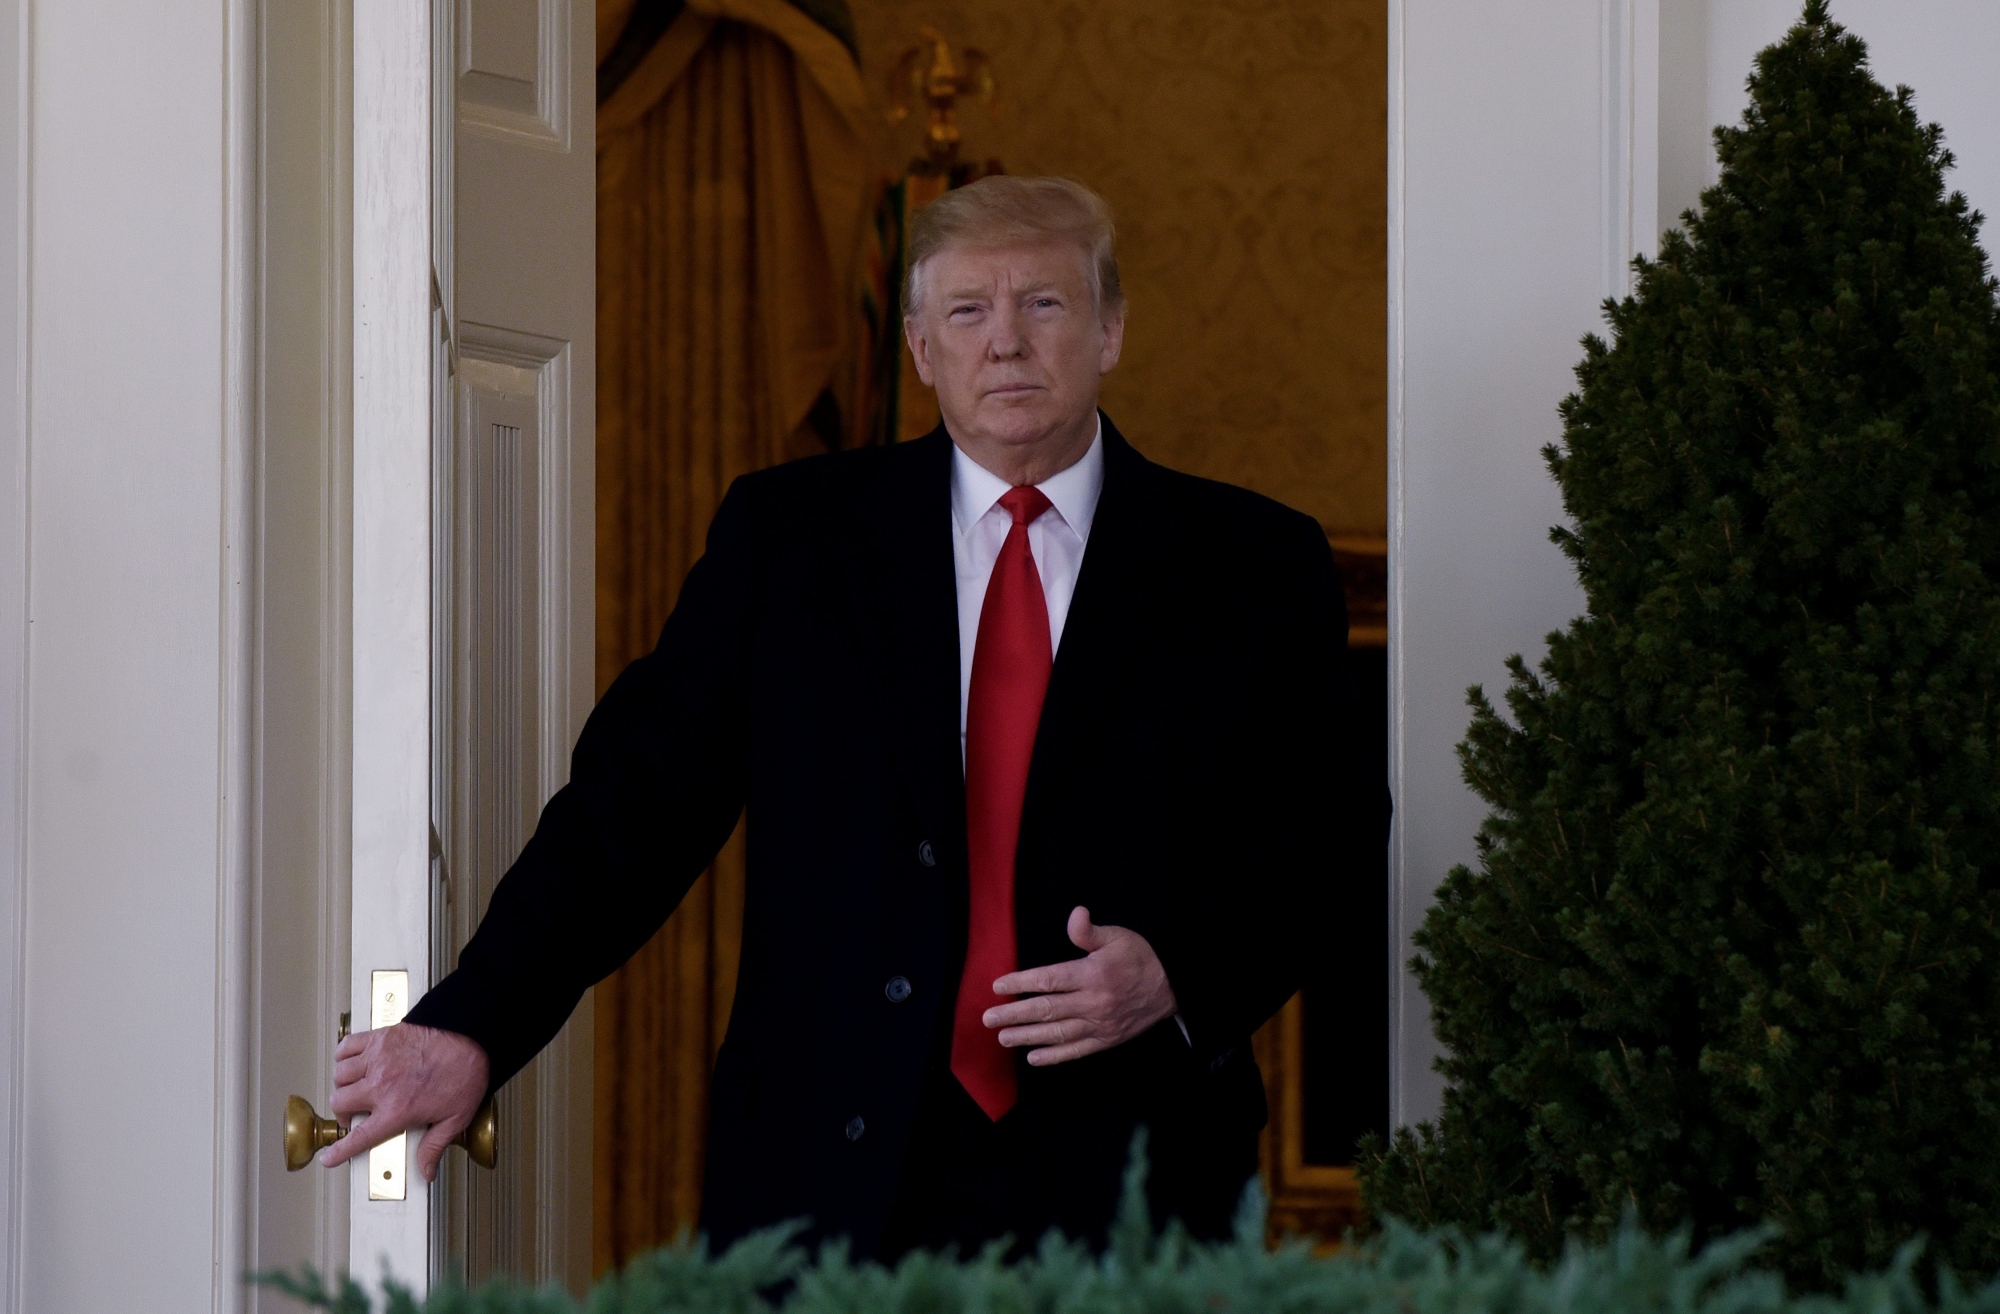 epa07319565 US President Donald J. Trump leaves the Oval Office to make a statement announcing that a deal has been reached to reopen the government through Feb. 15 during an event in the Rose Garden of the White House in Washington, DC, USA, 25 January 2019.  Trump announced a deal had been reached to end the ongoing partial shutdown of the federal government. The shutdown began when Congress and Trump failed to strike a deal on border security before a 22 December 2018 funding deadine.  EPA/Olivier Douliery / POOL USA TRUMP WHITE HOUSE